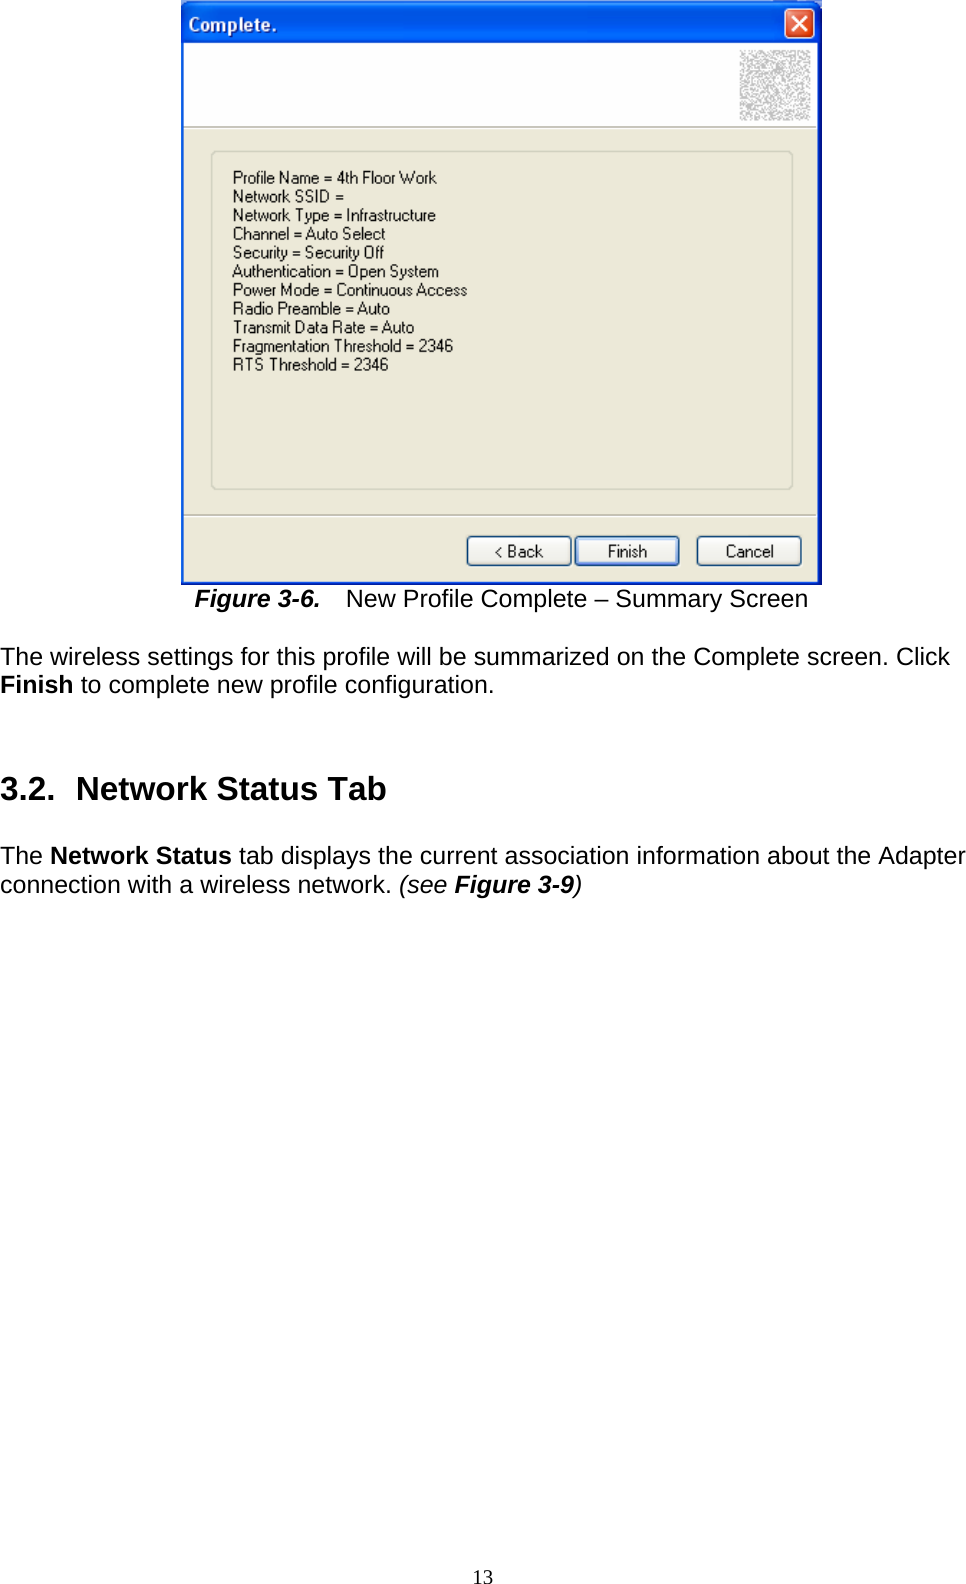  Figure 3-6.    New Profile Complete – Summary Screen  The wireless settings for this profile will be summarized on the Complete screen. Click Finish to complete new profile configuration.     3.2.   Network Status Tab  The Network Status tab displays the current association information about the Adapter connection with a wireless network. (see Figure 3-9)  13   